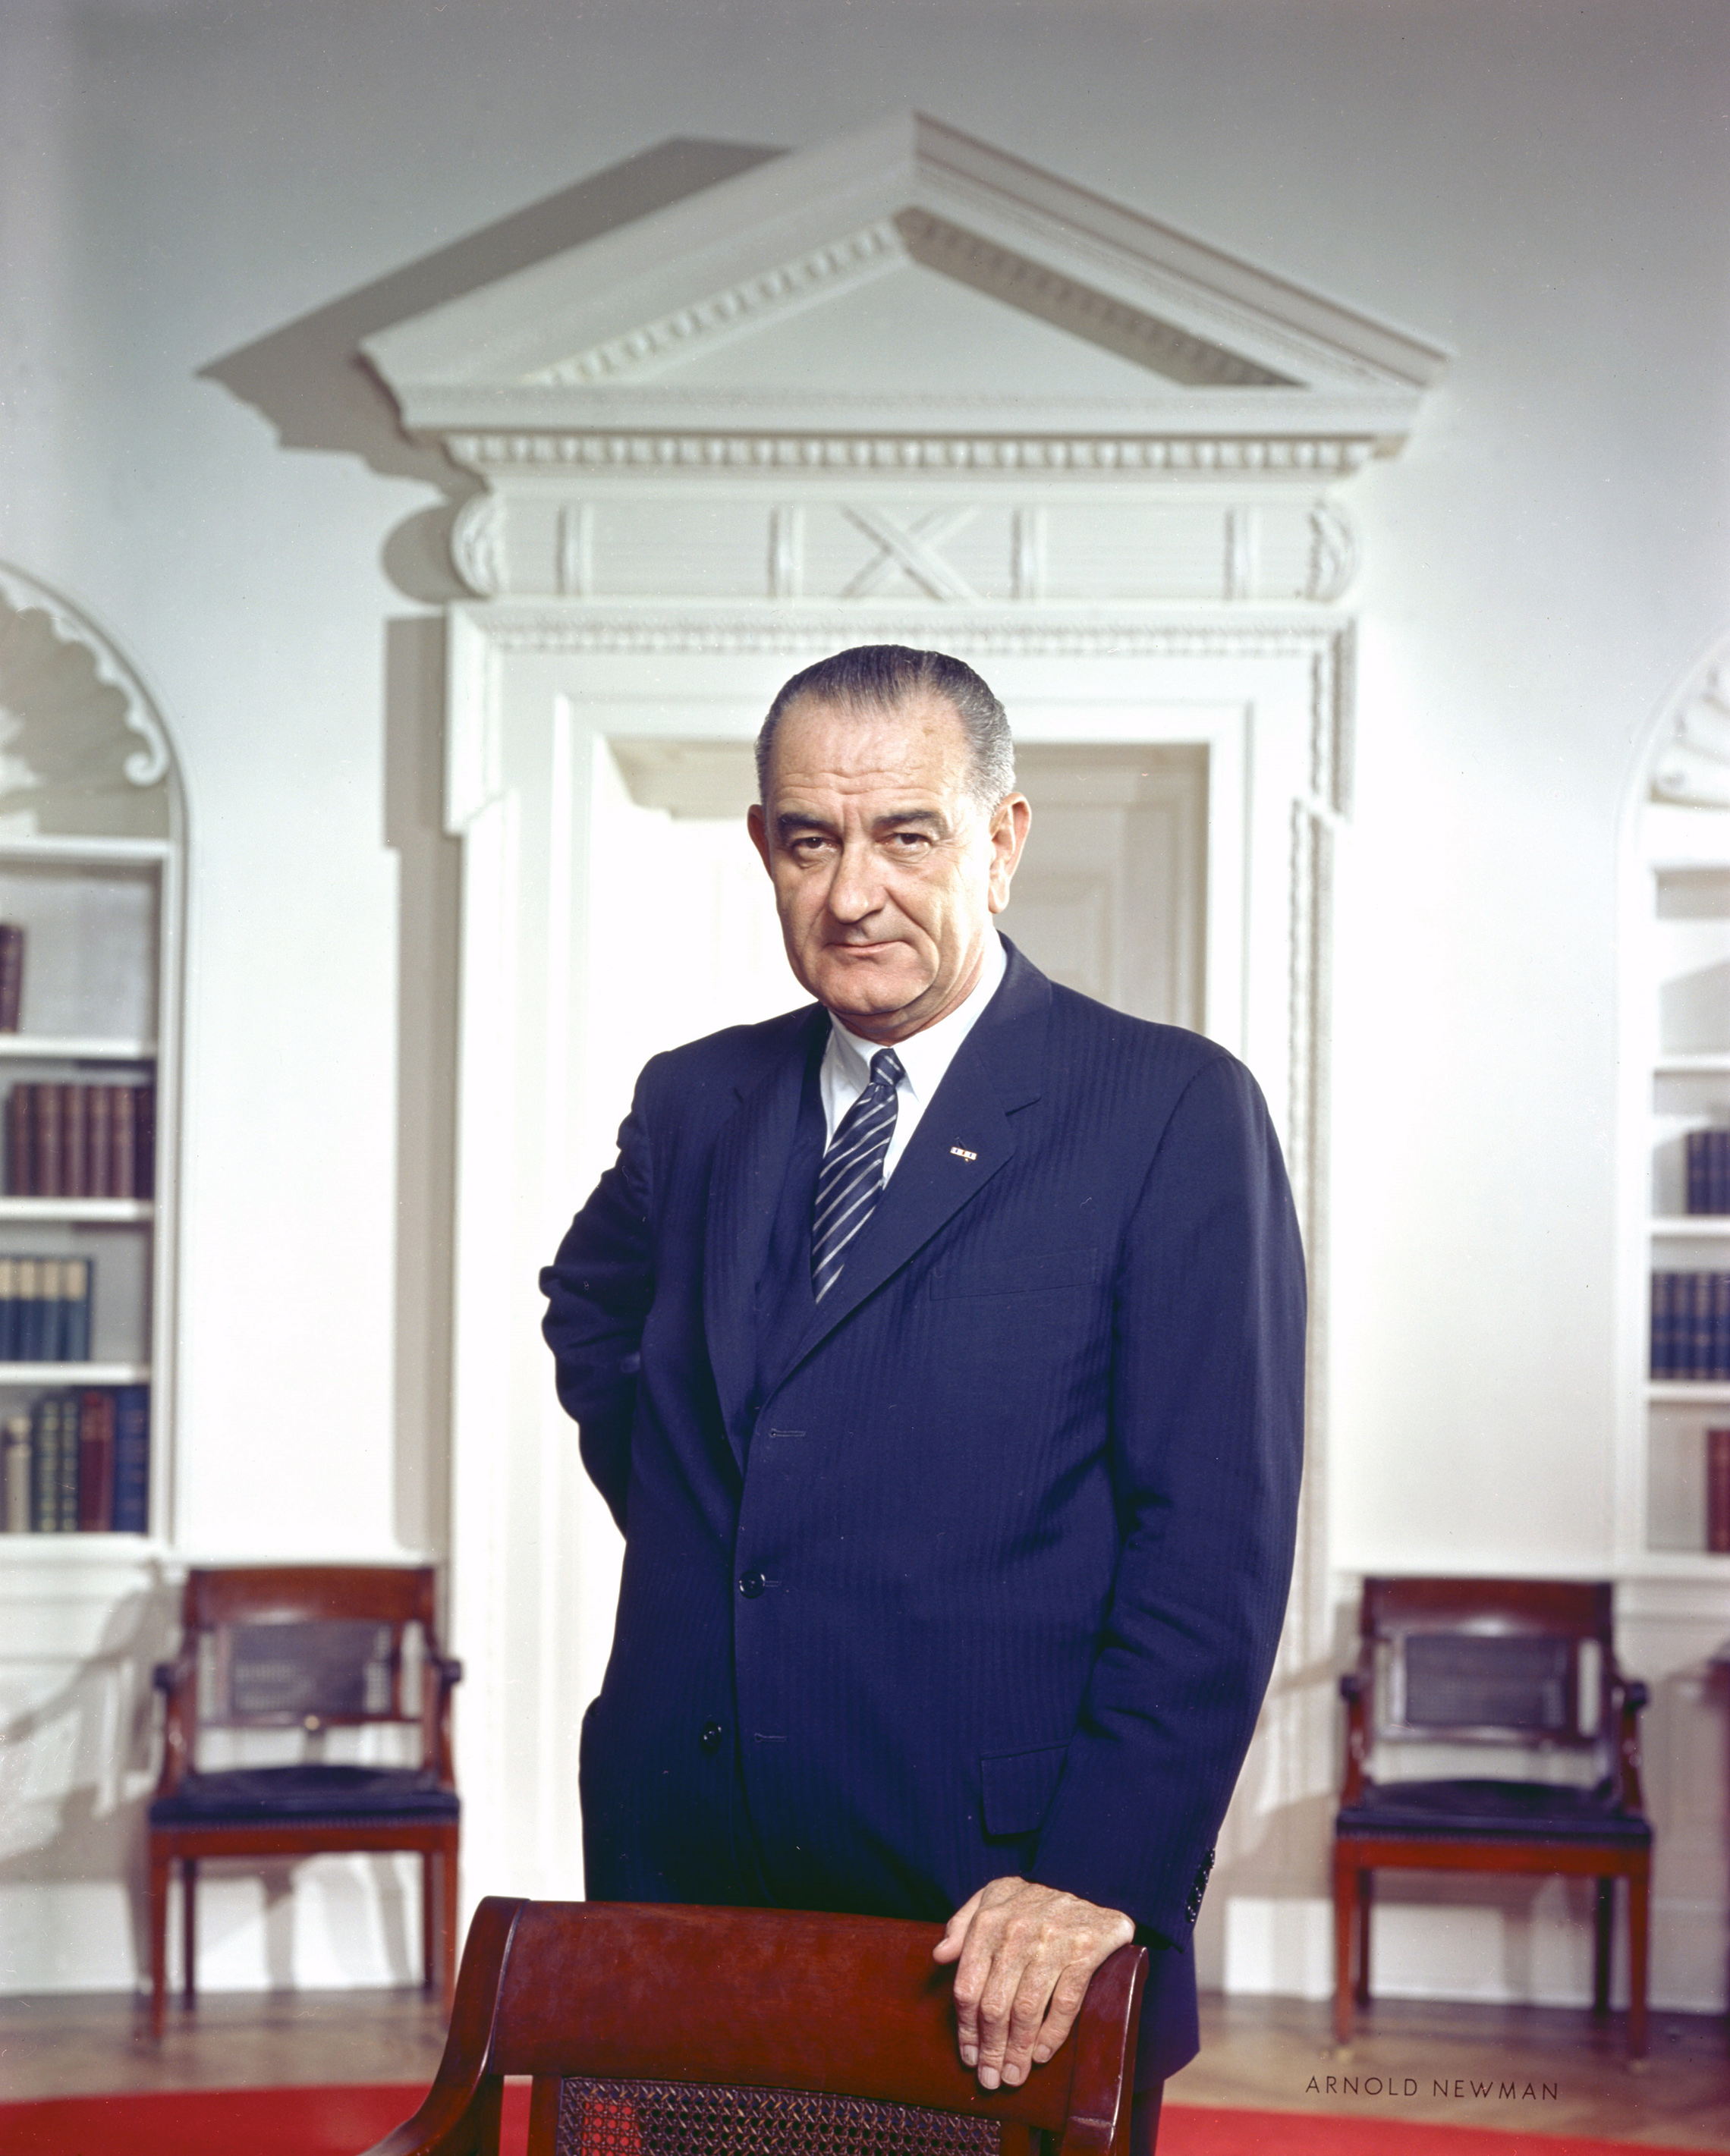 March 4, 1964: Photo portrait of President Lyndon B. Johnson in the Oval Office.